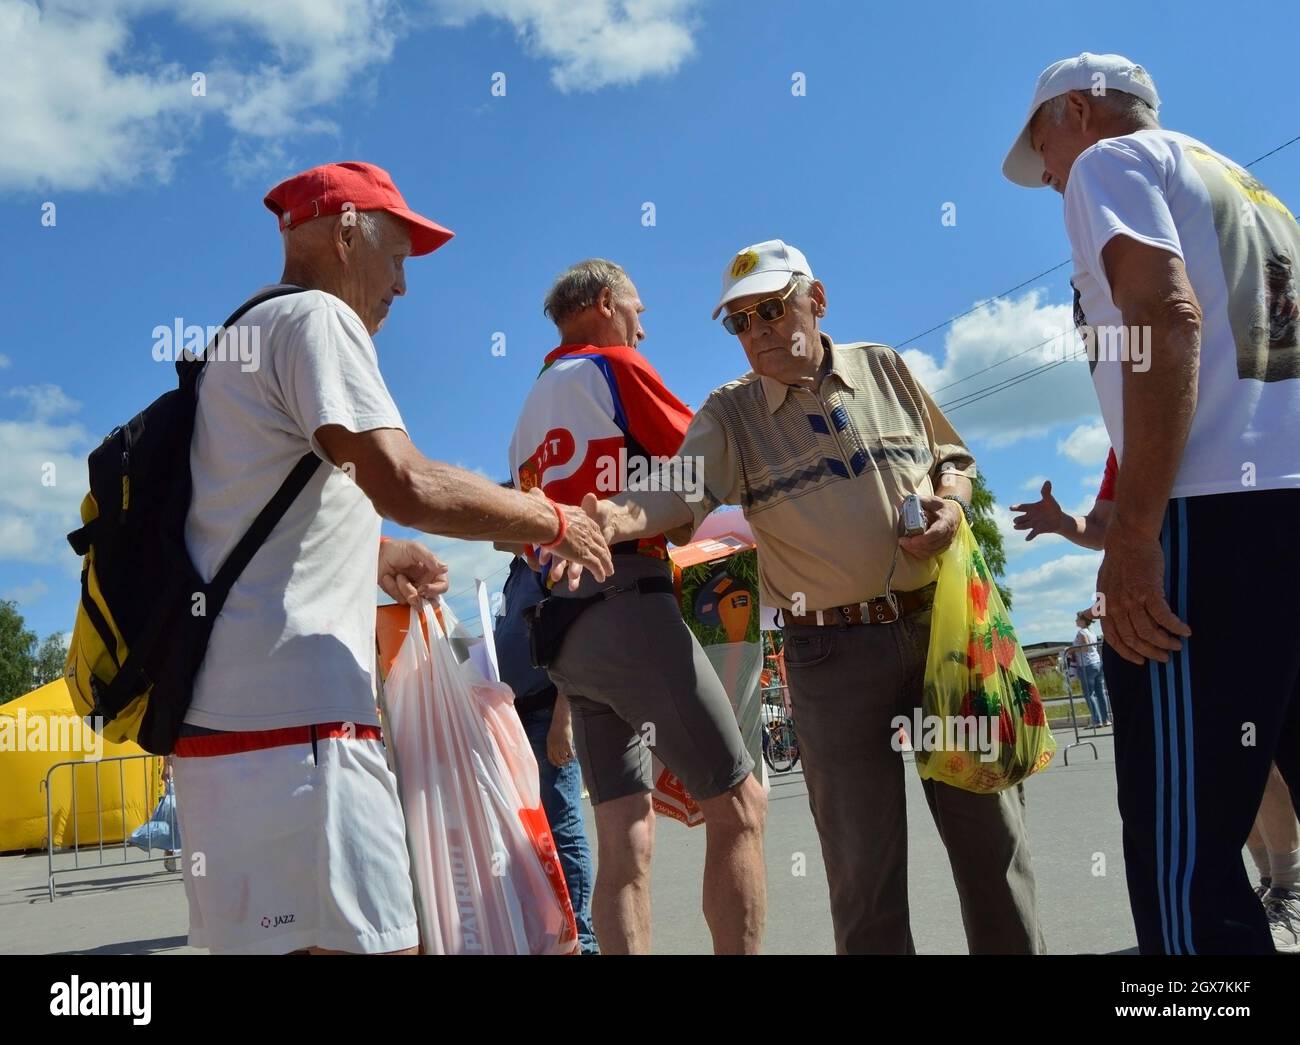 Kovrov, Russia. 12 August 2017. Sports holiday 'Velobum', dedicated to Athlete's day. Friends congratulate the elderly participant on the victory afte Stock Photo